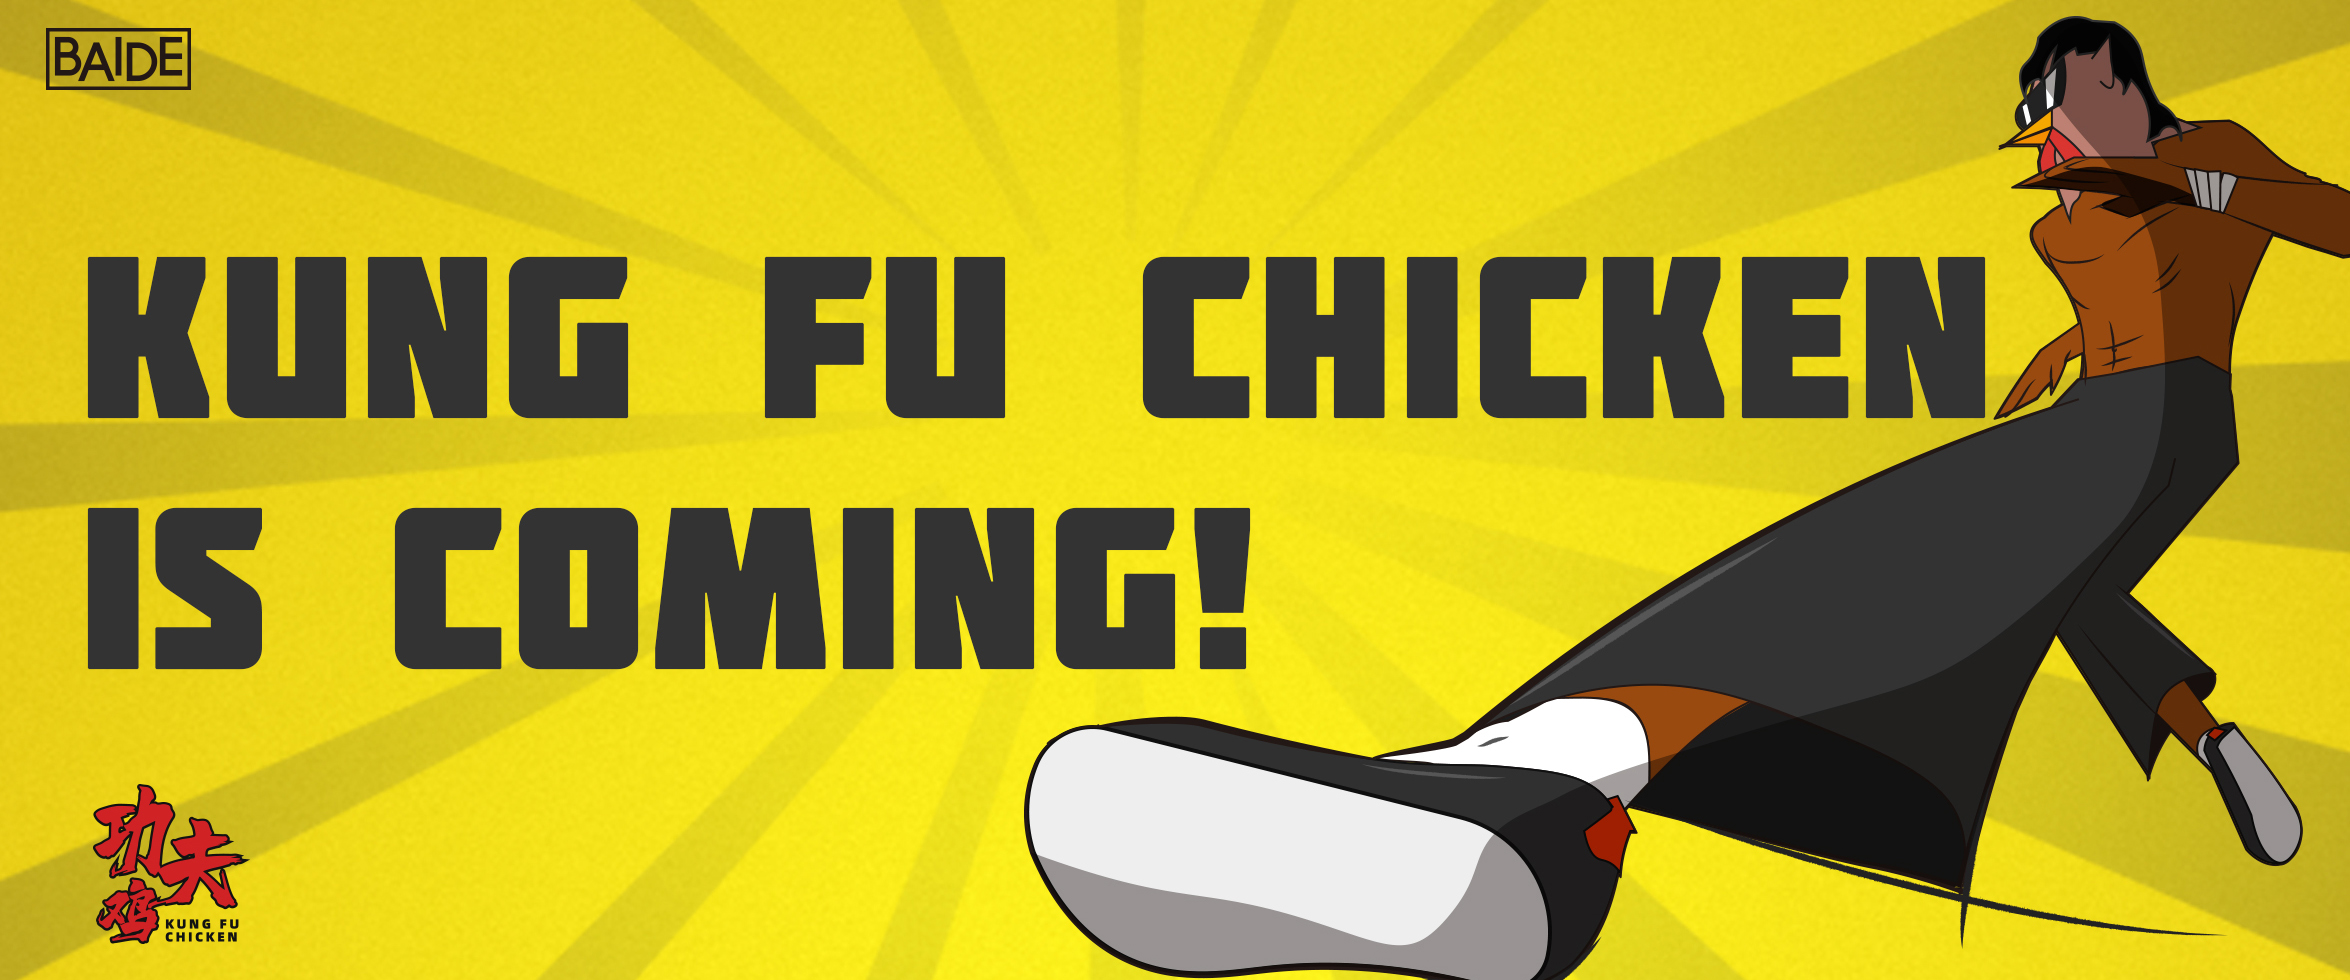 KUNG FU CHICKEN is coming!